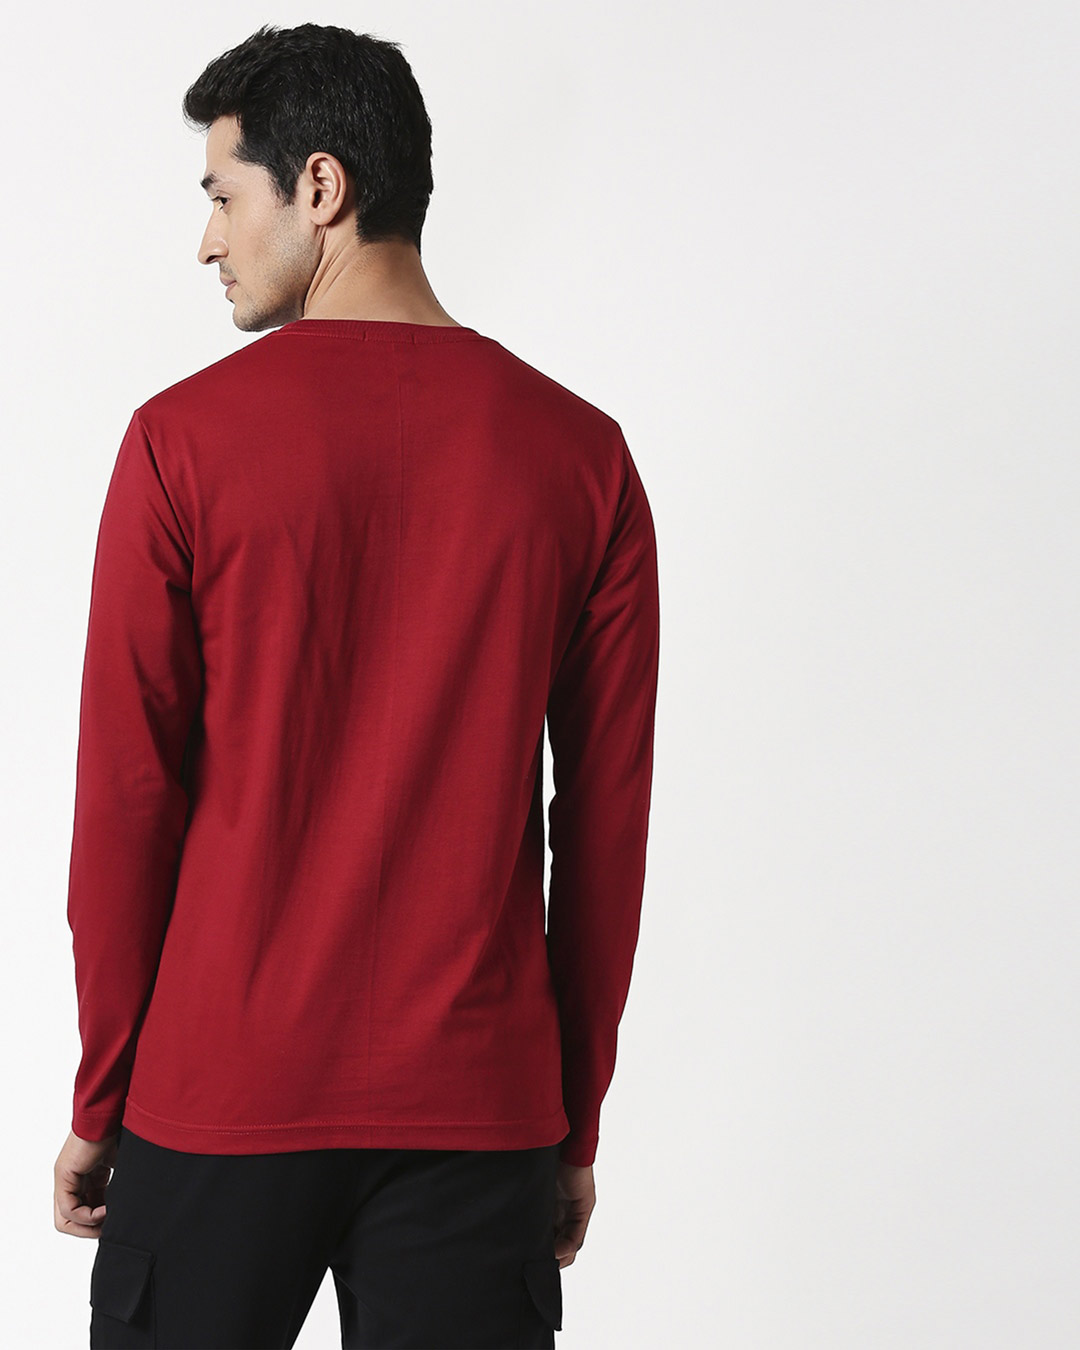 Shop With a Plan Full Sleeve T-Shirt Cherry Red-Back